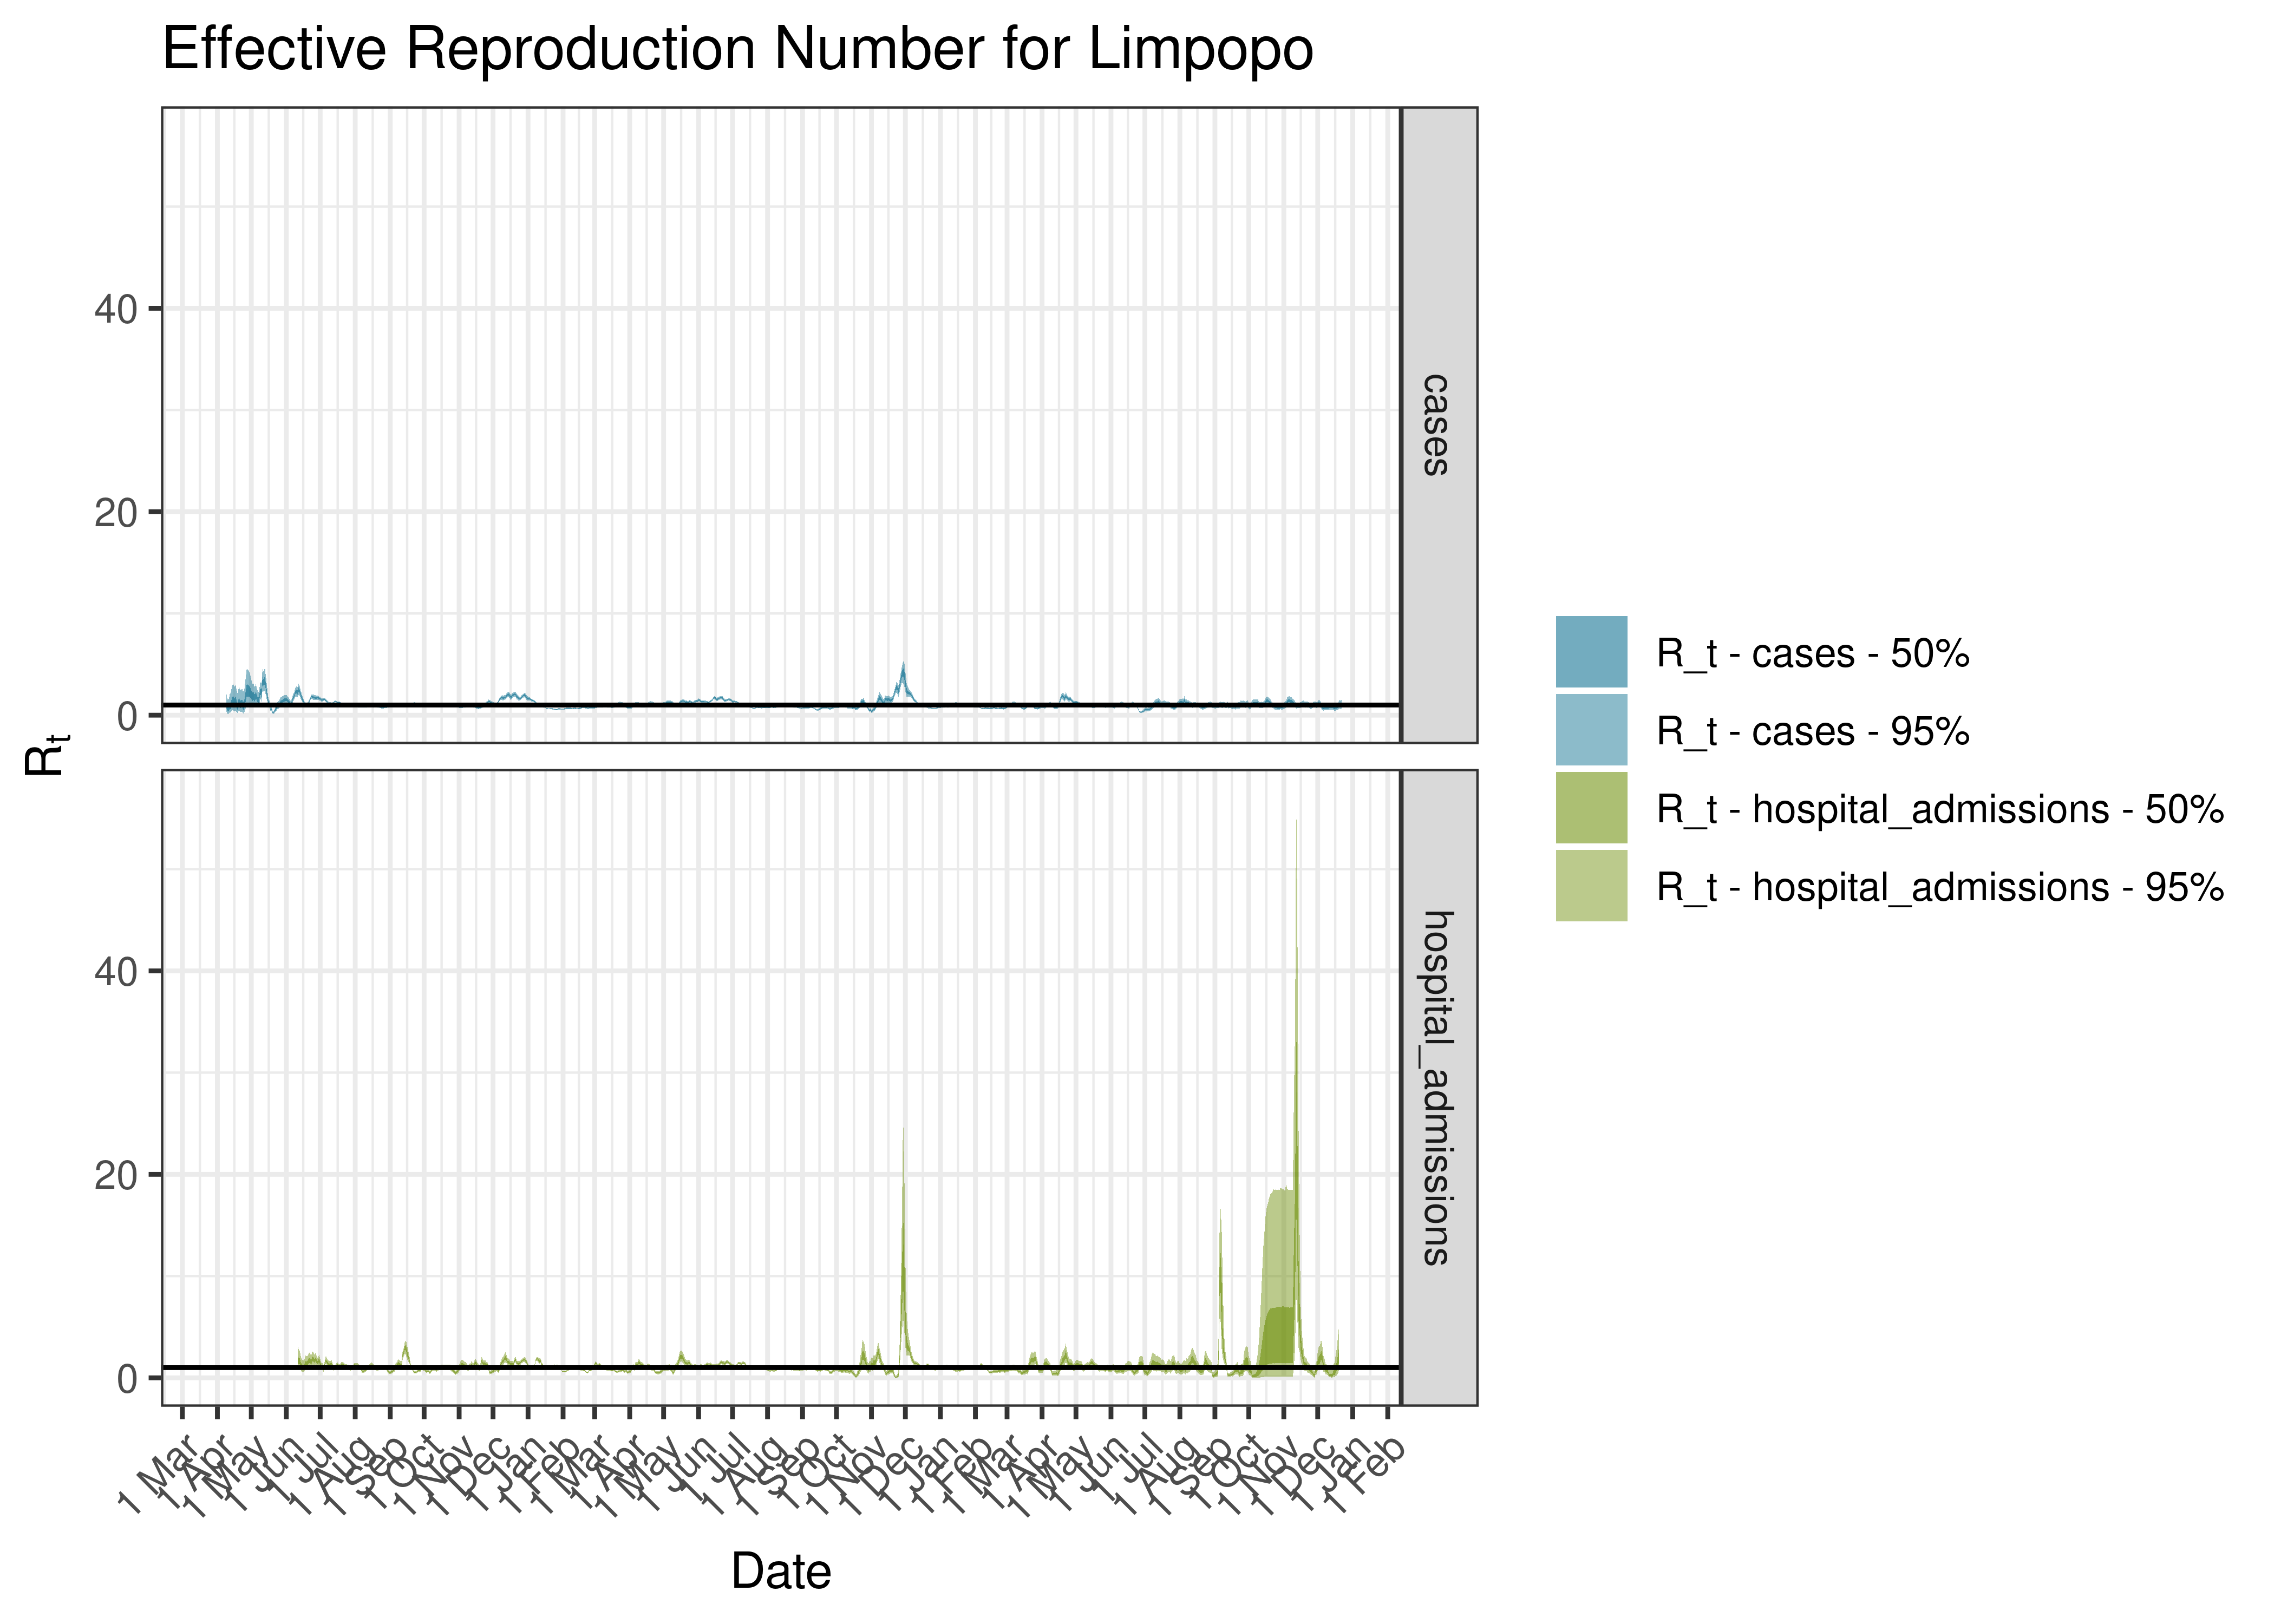 Estimated Effective Reproduction Number for Limpopo since 1 April 2020